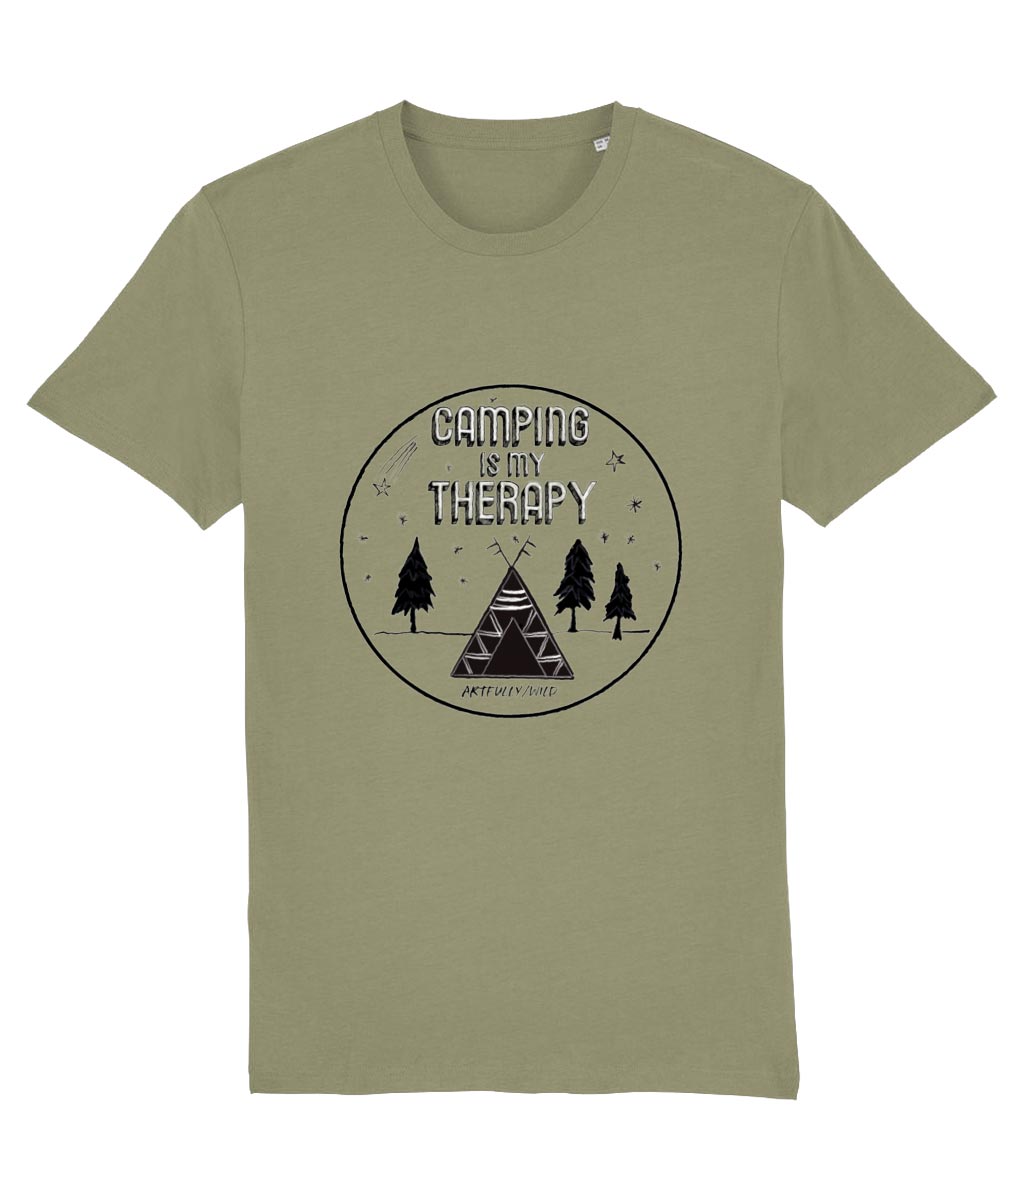 'CAMPING IS MY THERAPY' Organic Unisex Sage Green T-Shirt. Printed with eco-friendly water-based Inks. Original Design by Artfully Wild.